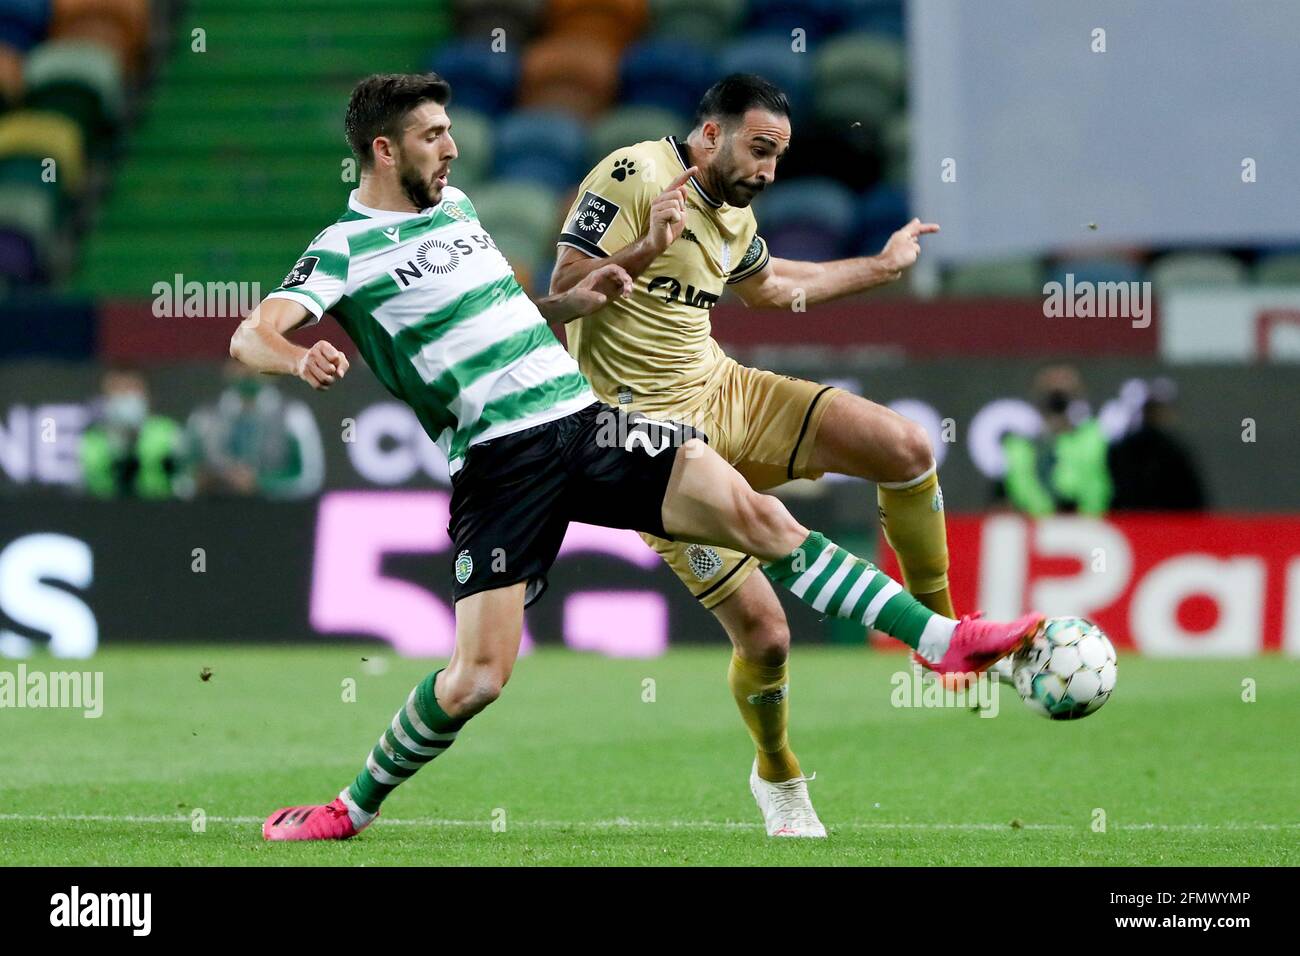 Lisbon. 11th May, 2021. Paulinho (L) of Sporting CP vies with Adil Rami of Boavista FC during a Portuguese League football match at Jose Alvalade stadium in Lisbon, Portugal on May 11, 2021. Credit: Pedro Fiuza/Xinhua/Alamy Live News Stock Photo